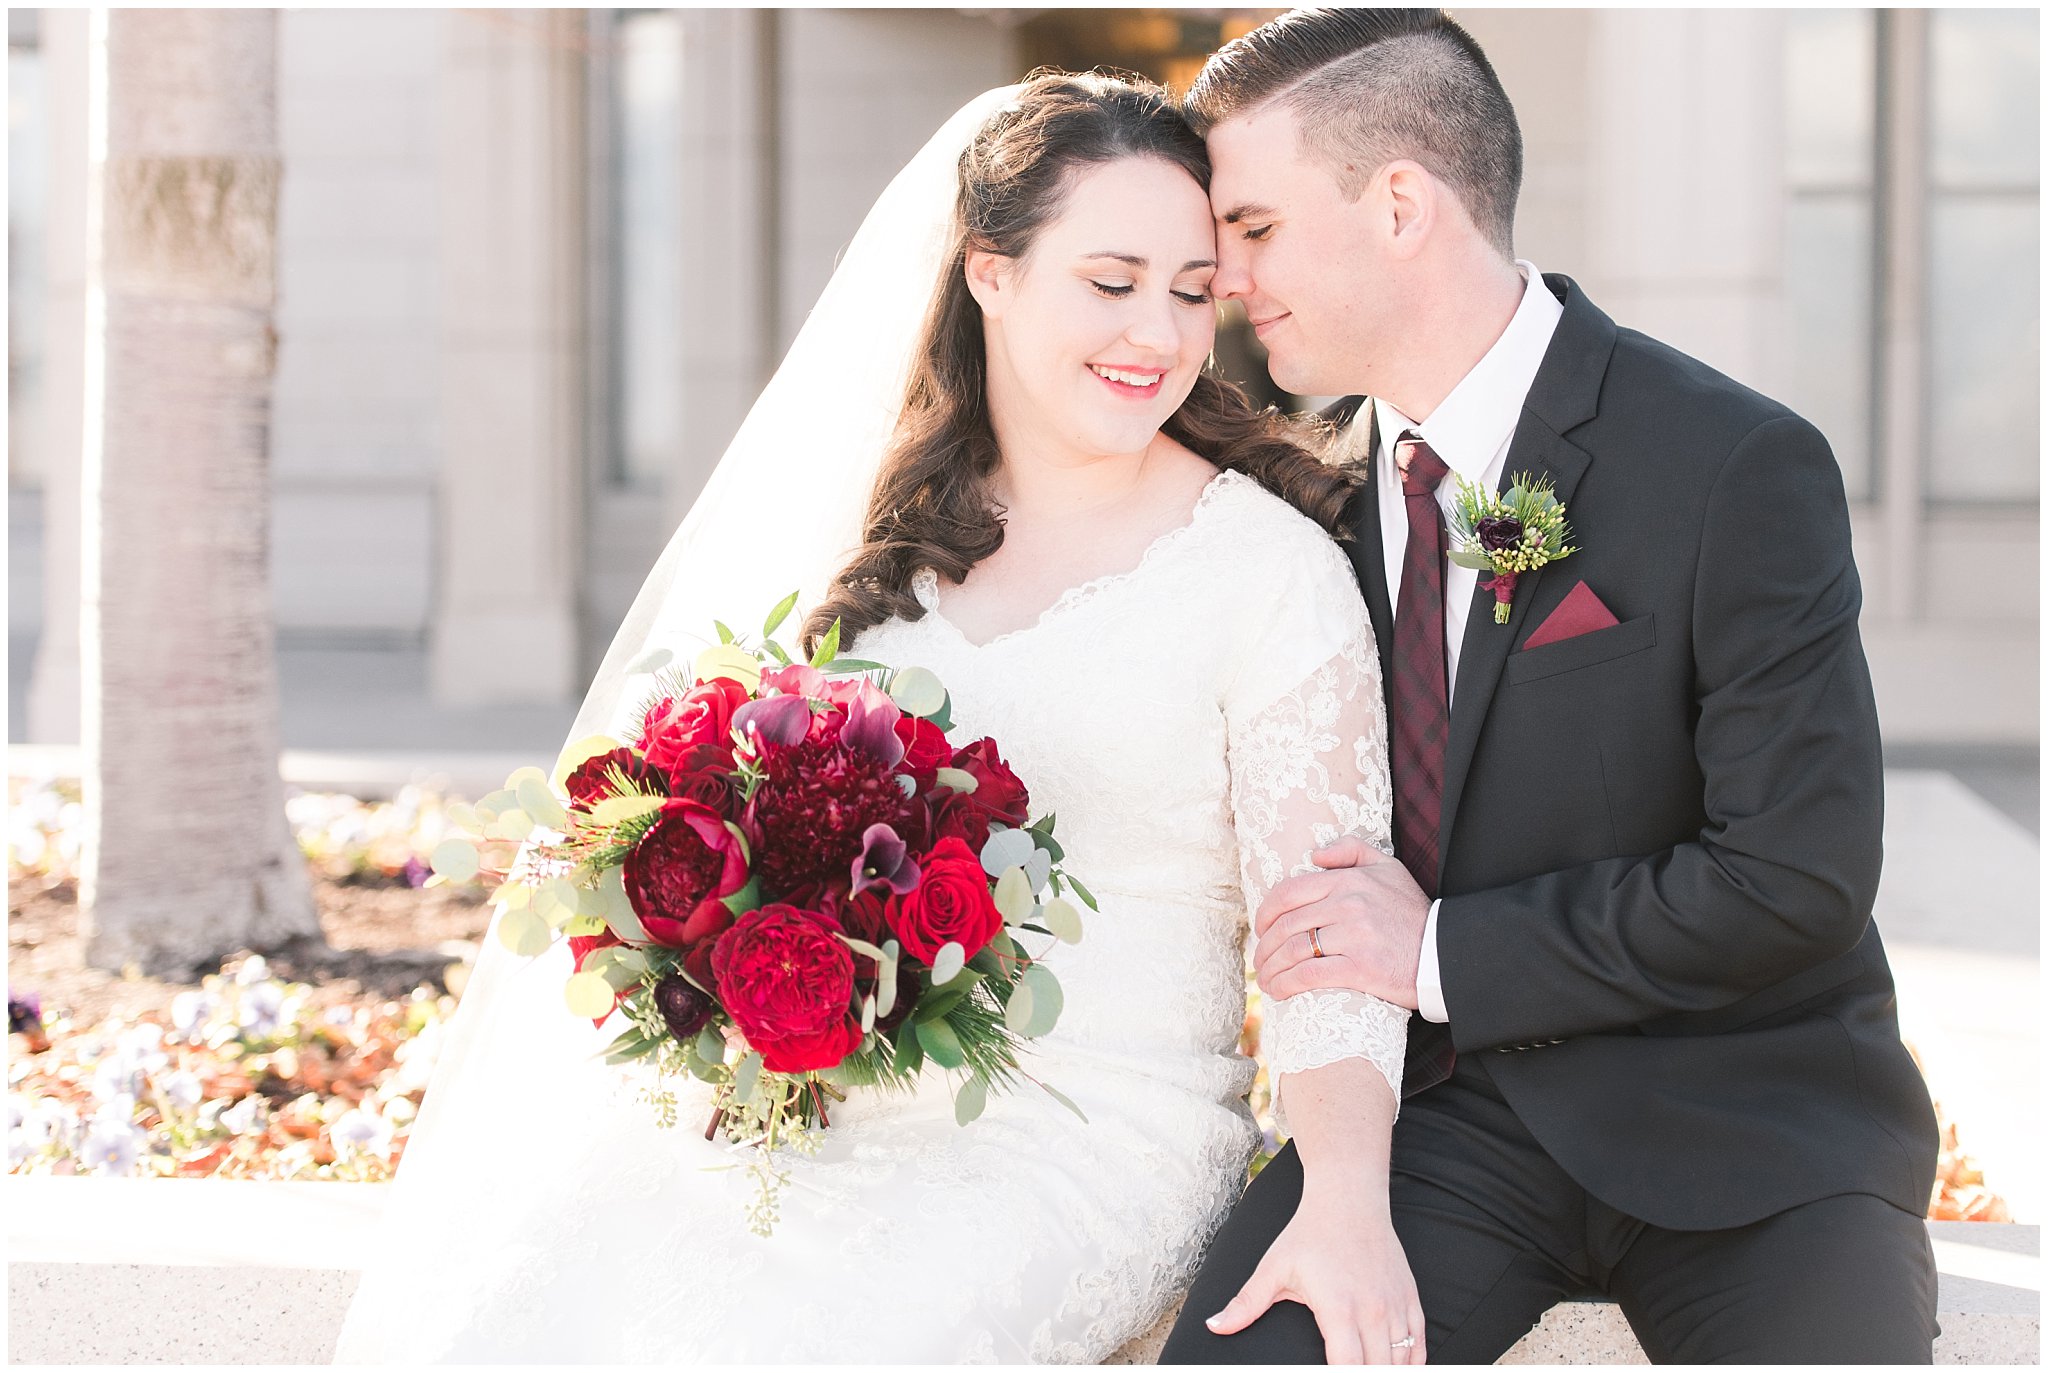 Bride and groom portraits with a veil, flowy lace dress and black suit with red and white bouquet at the Oquirrh Mountain Temple | Oquirrh Mountain Temple and Gardner Village Wedding | The Gathering Place | Jessie and Dallin Photography